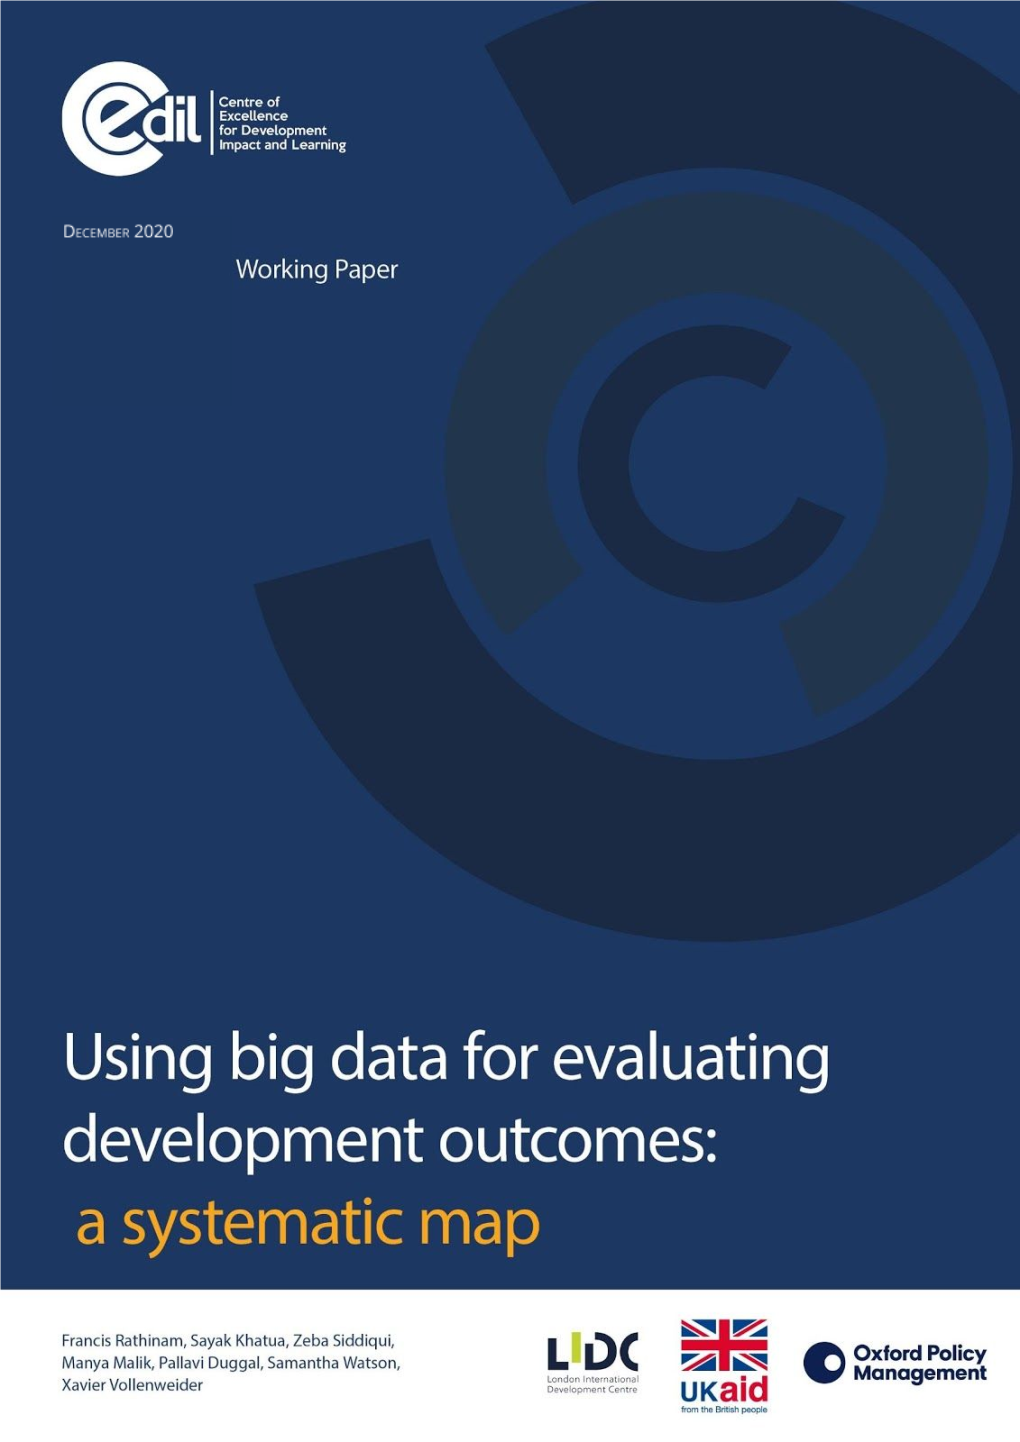 Using Big Data for Evaluating Development Outcomes: a Systematic Map About CEDIL